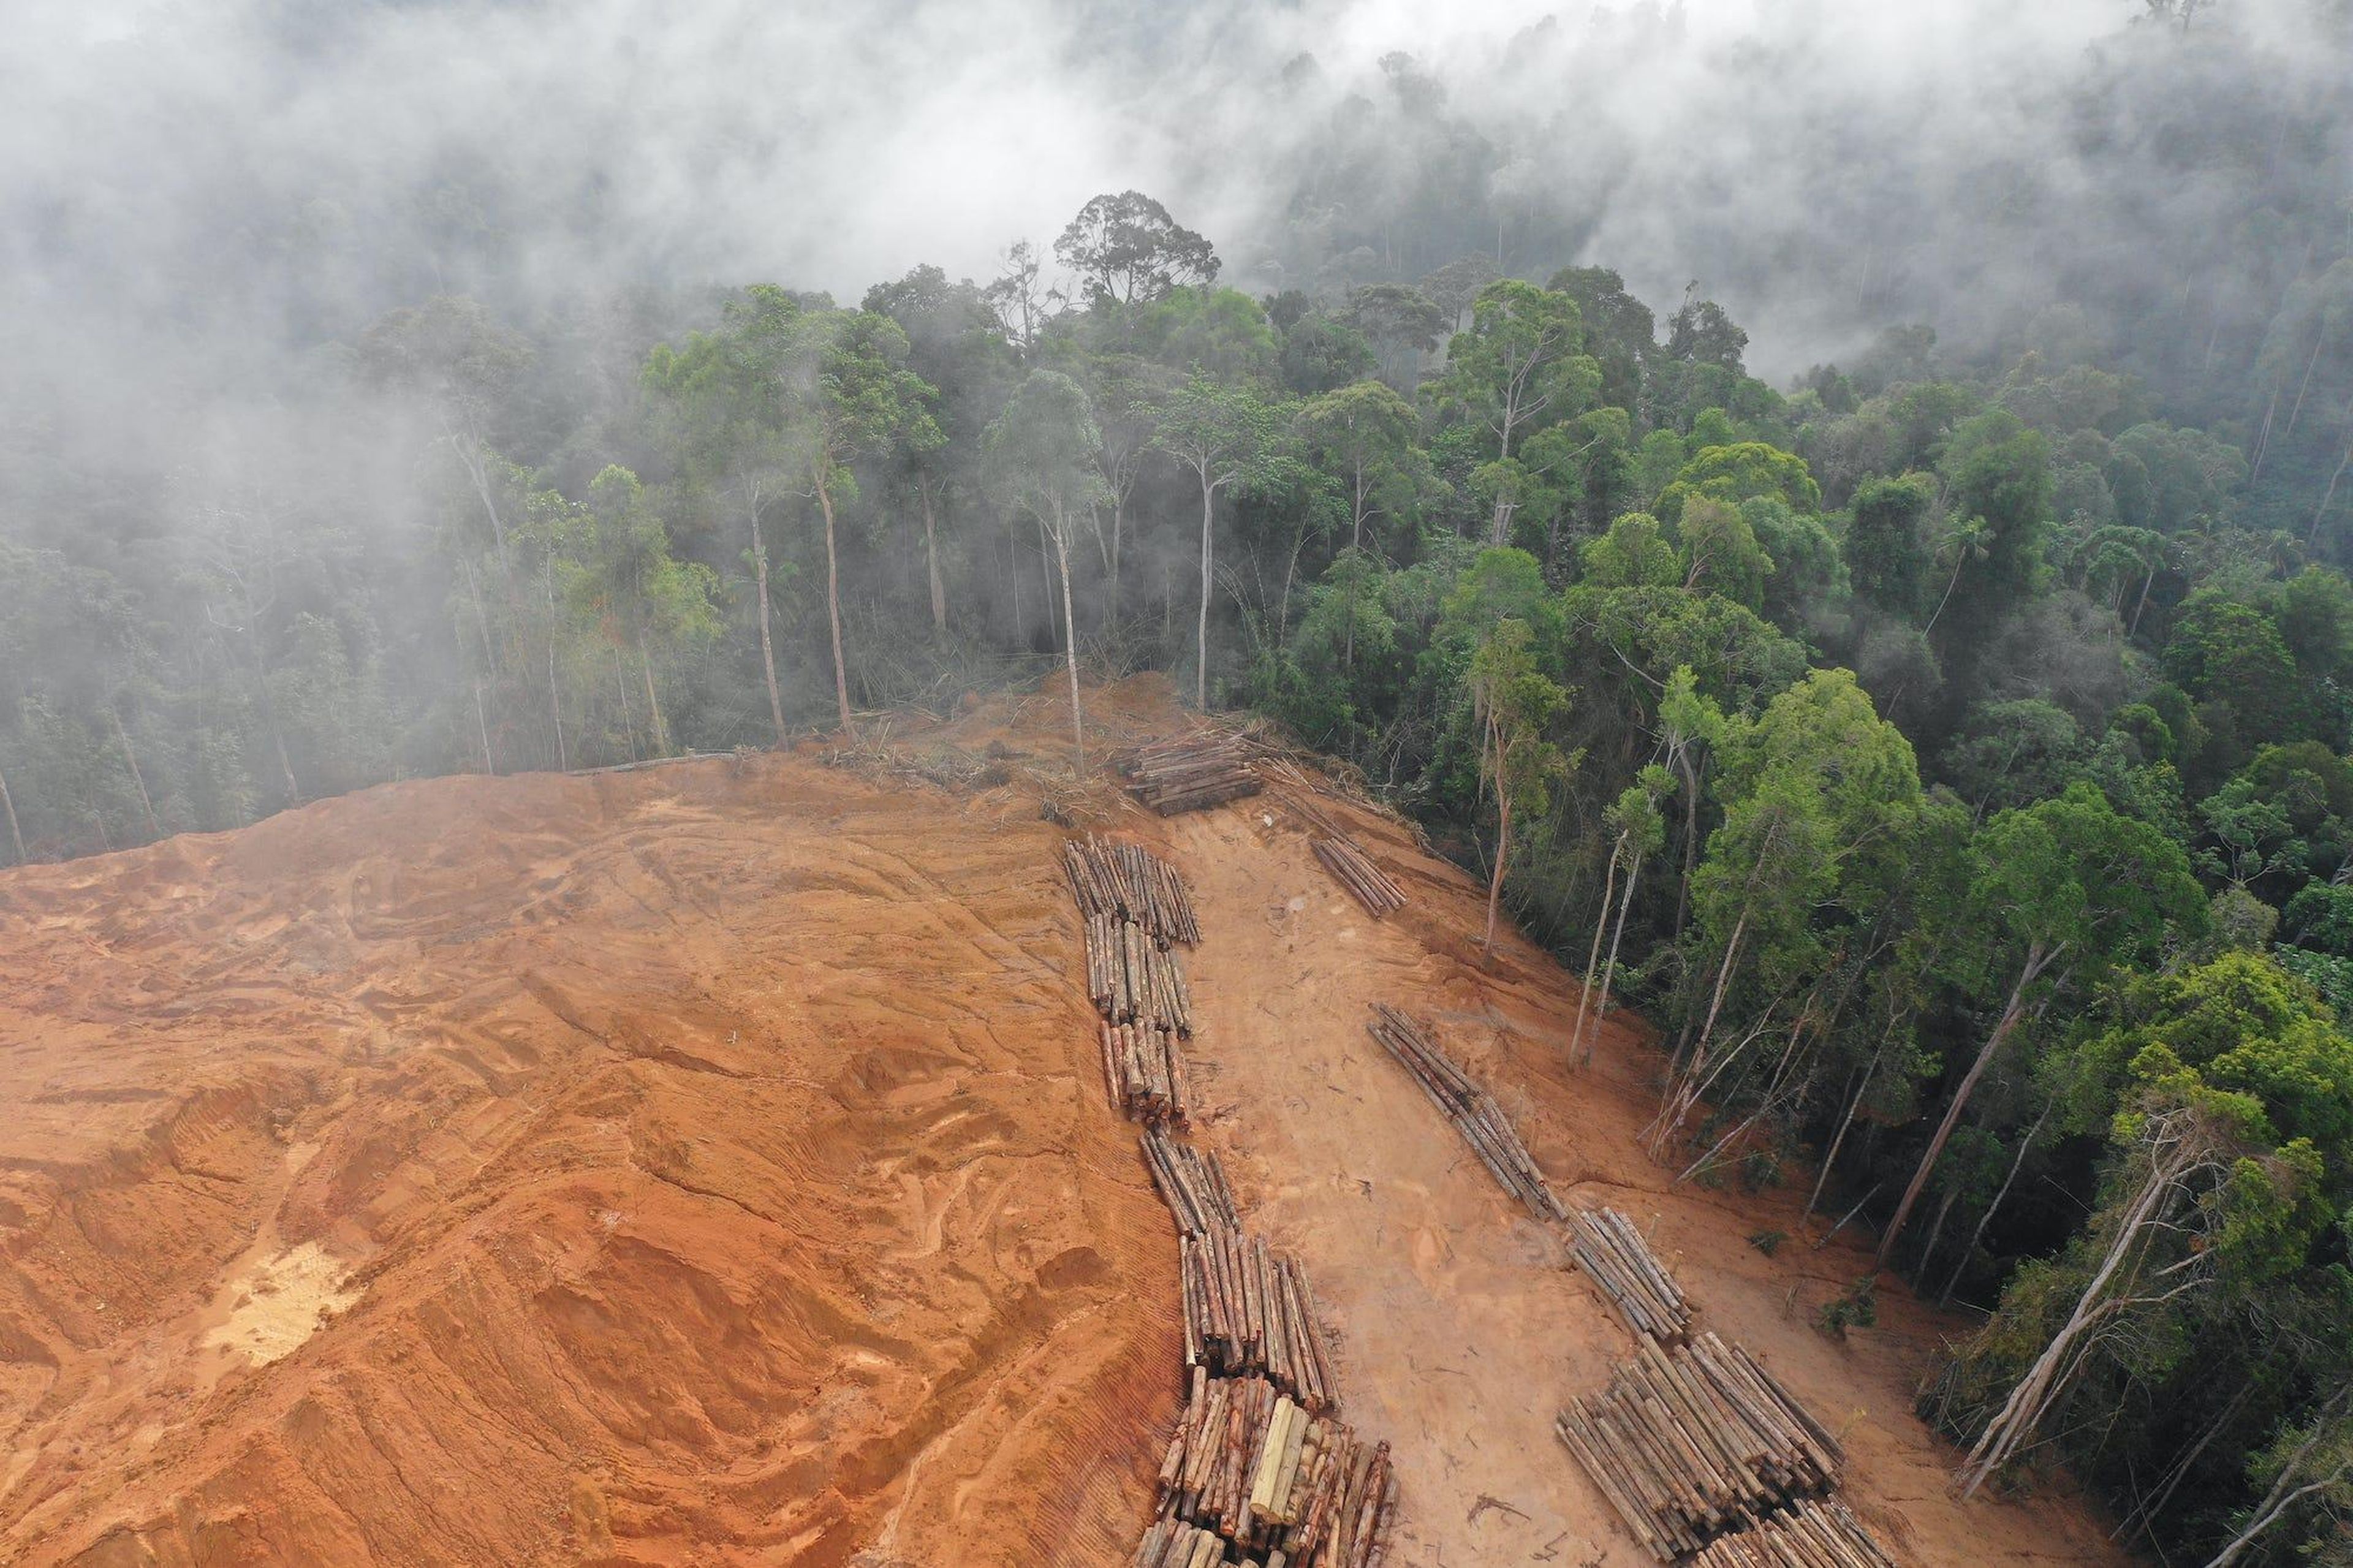 Aerial photo of deforestation in Malaysia rainforest.